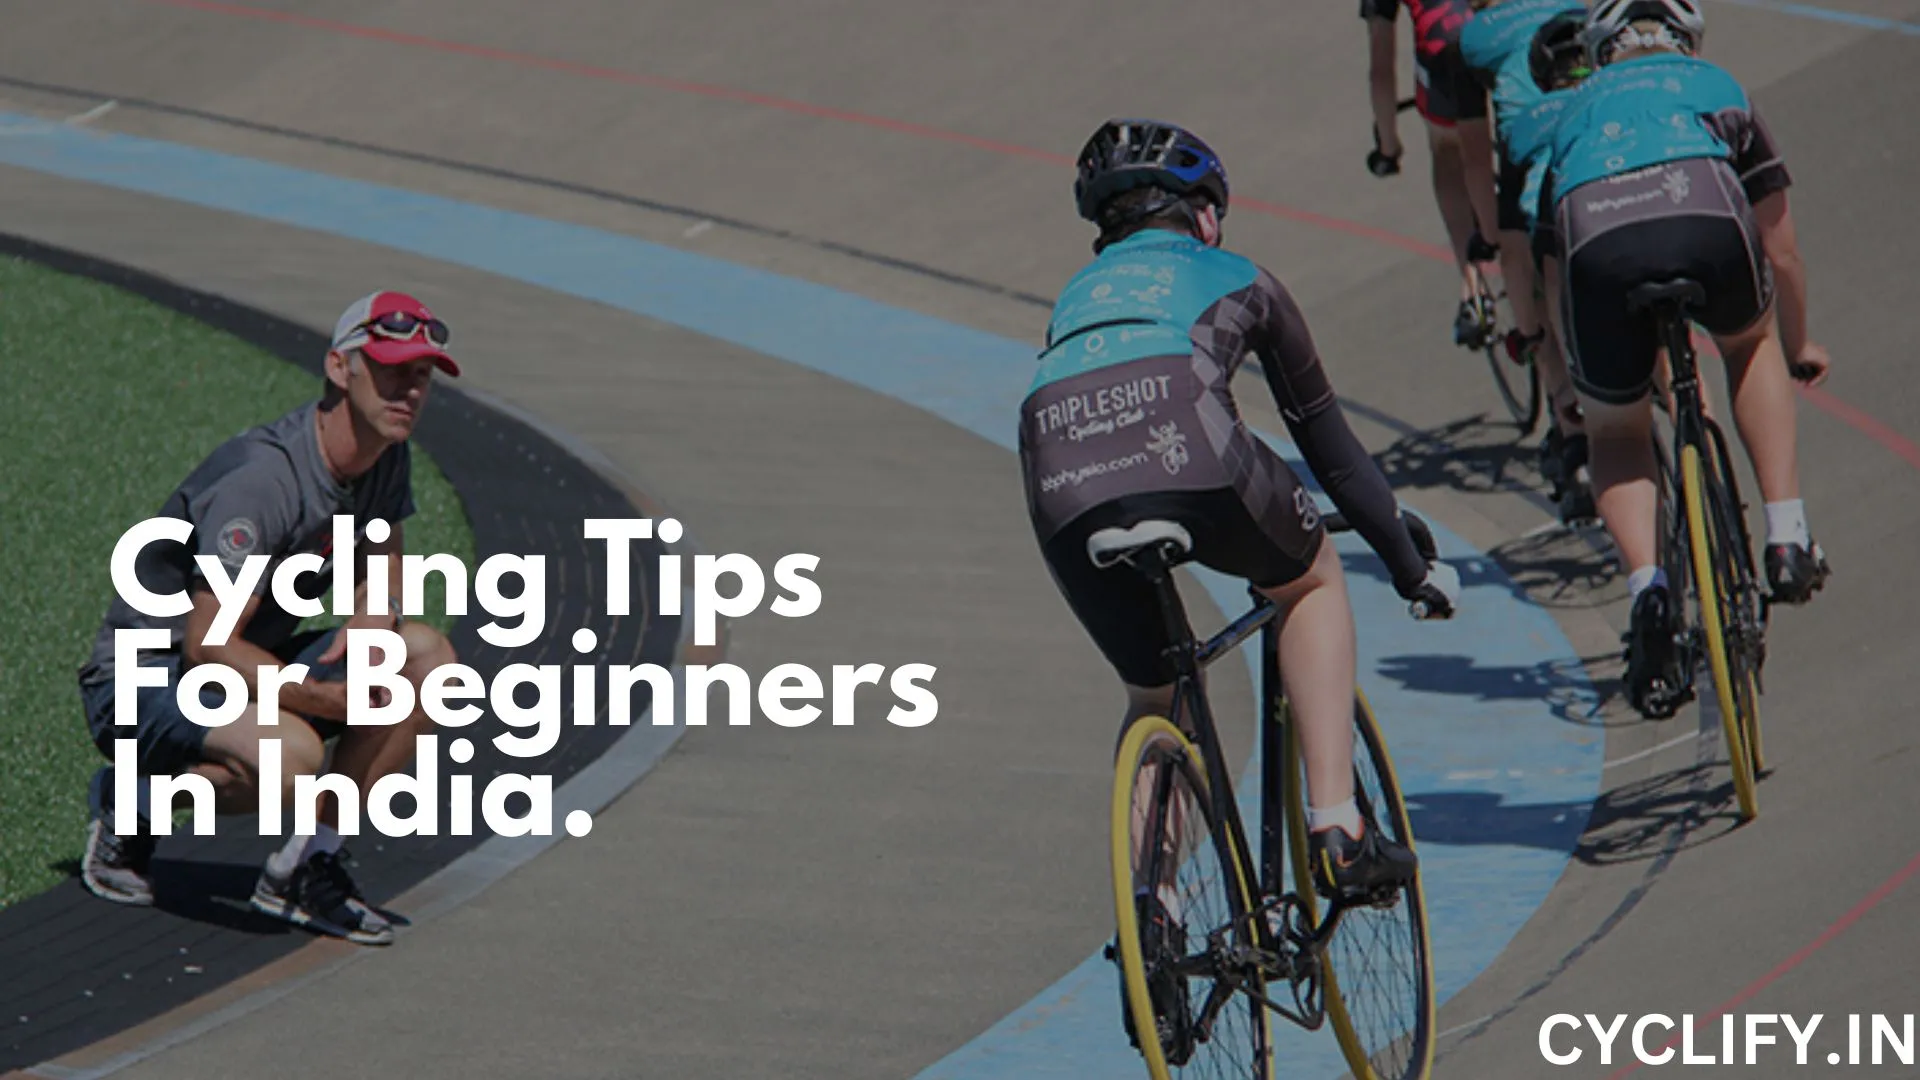 Cycling tips for beginners in India - Cyclist racing on a track.